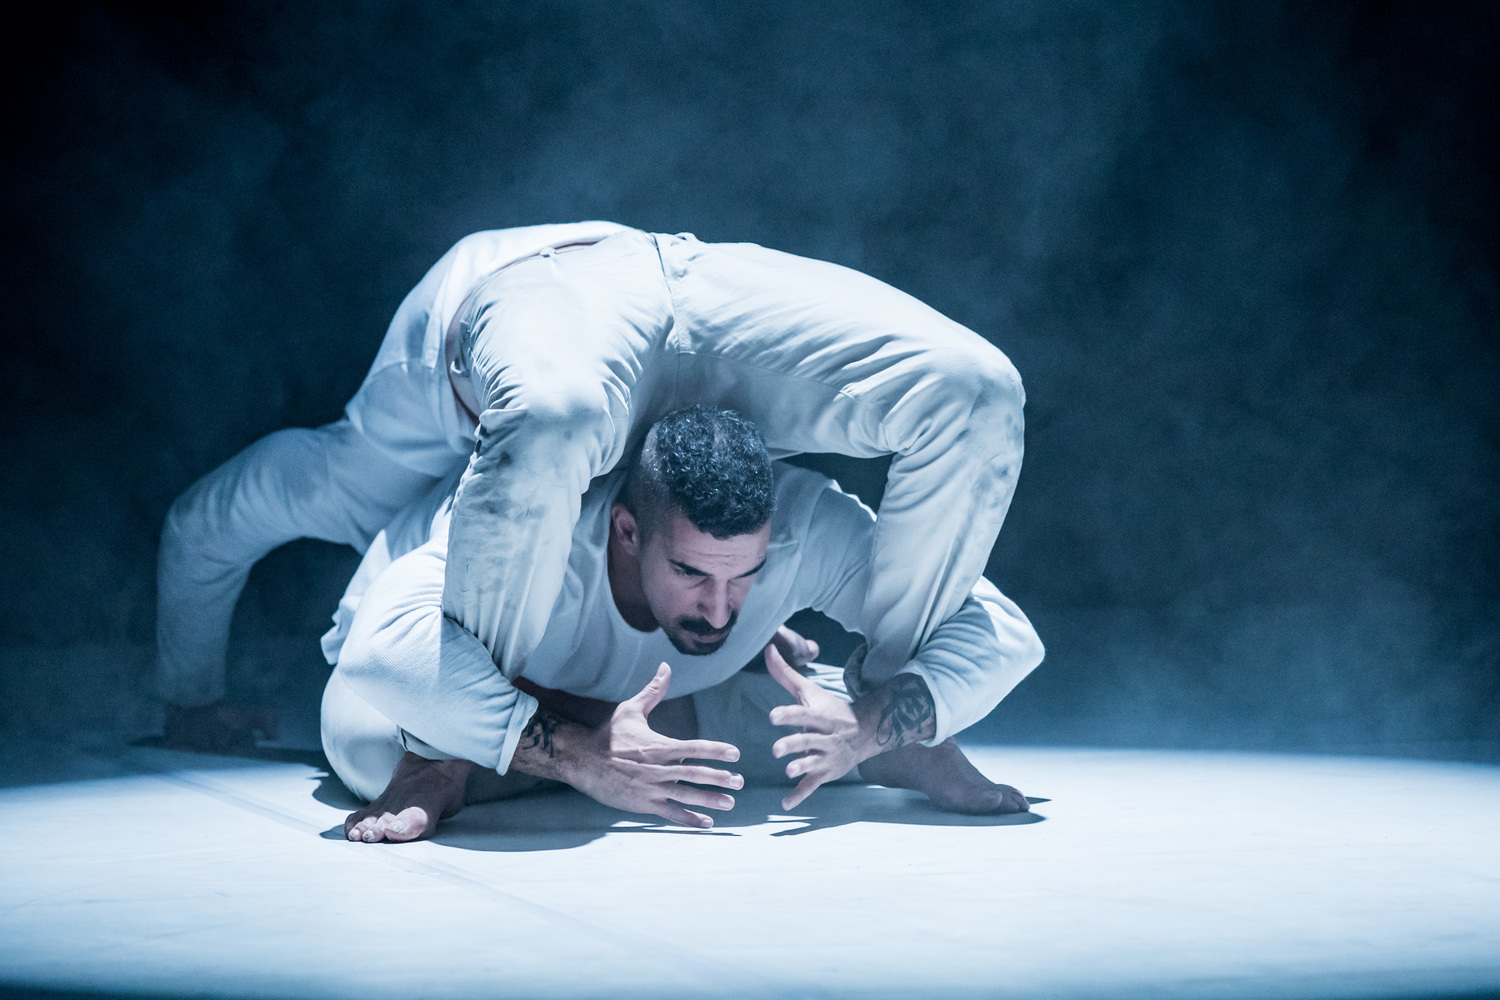 A FUSION OF CONTORTION, HIP-HOP, THREADING, BREAKDANCING AND CONTEMPORARY DANCE. Dance St. Louis kicks off its 53rd season with an arousing presentation of Wewolf, the LA-based company of award-winning international artists James Gregg and RubberLegz (aka Rauf Yasit). 4